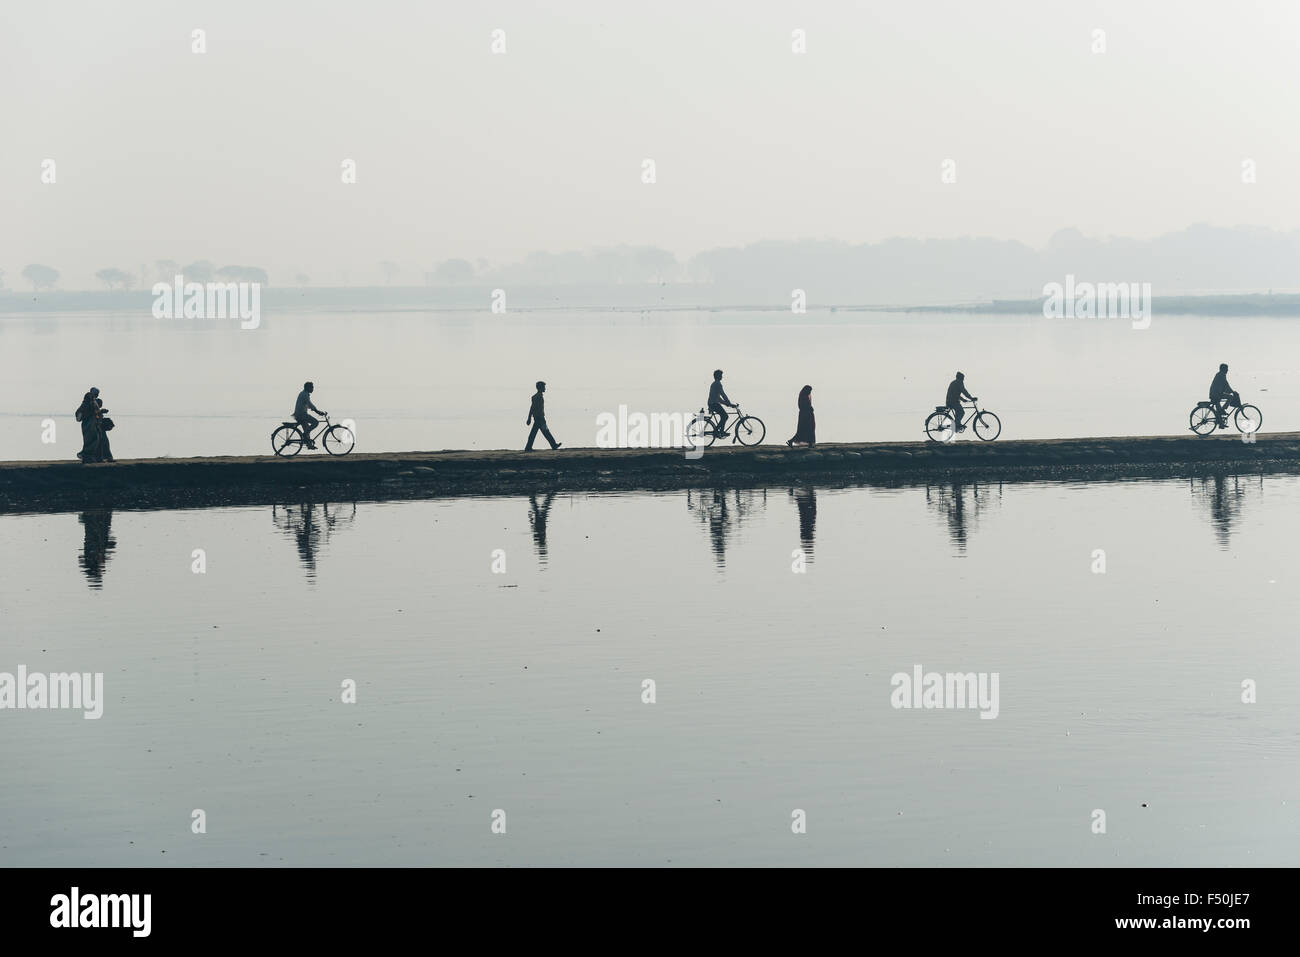 Some cyclists and pedestrians are crossing the Yamuna river on a dam in the morning haze Stock Photo